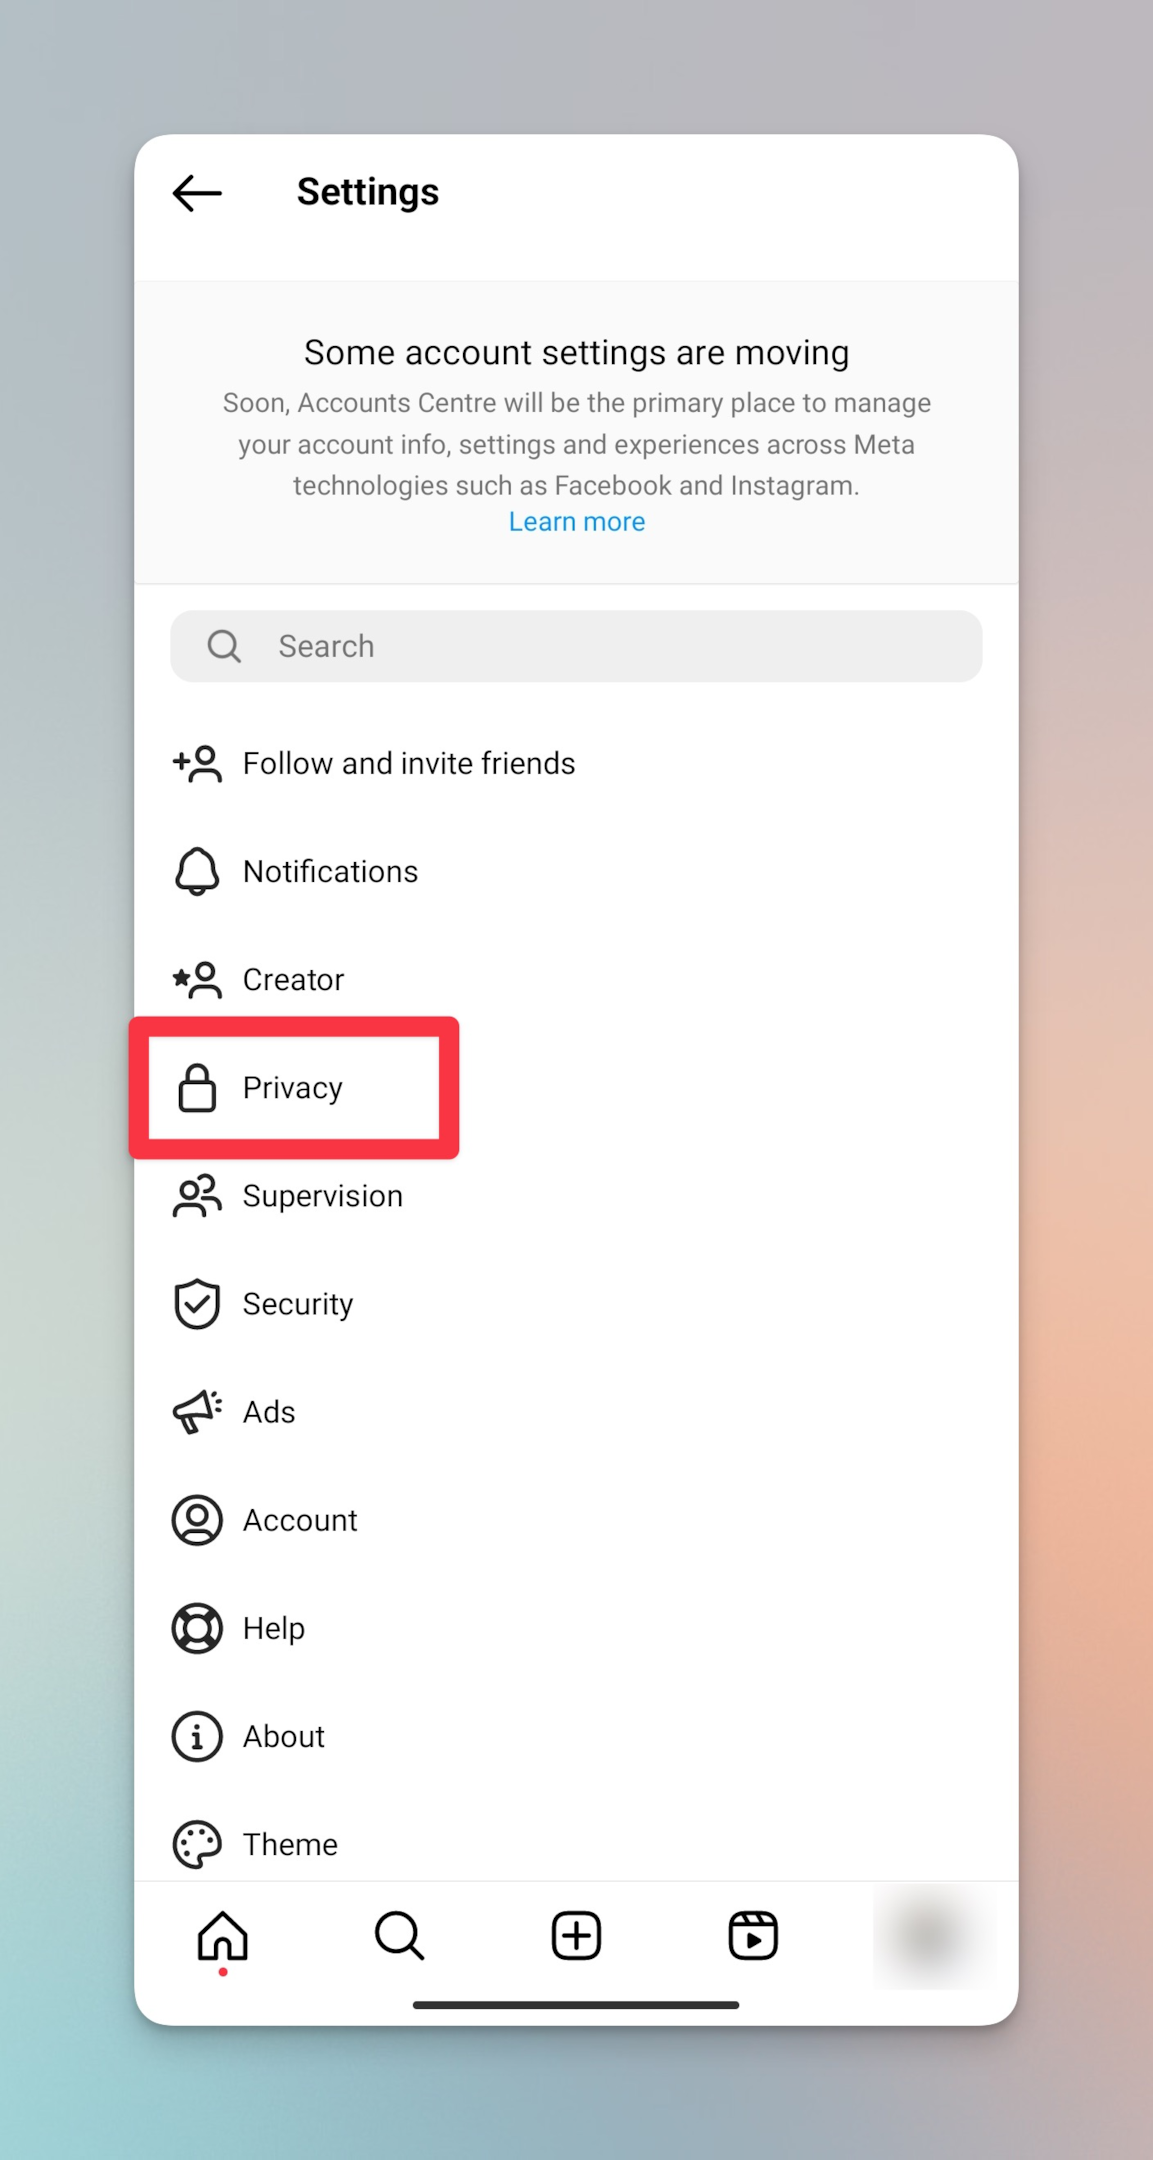 Remote.tools highlighting Privacy option to switch to private mode on Instagram